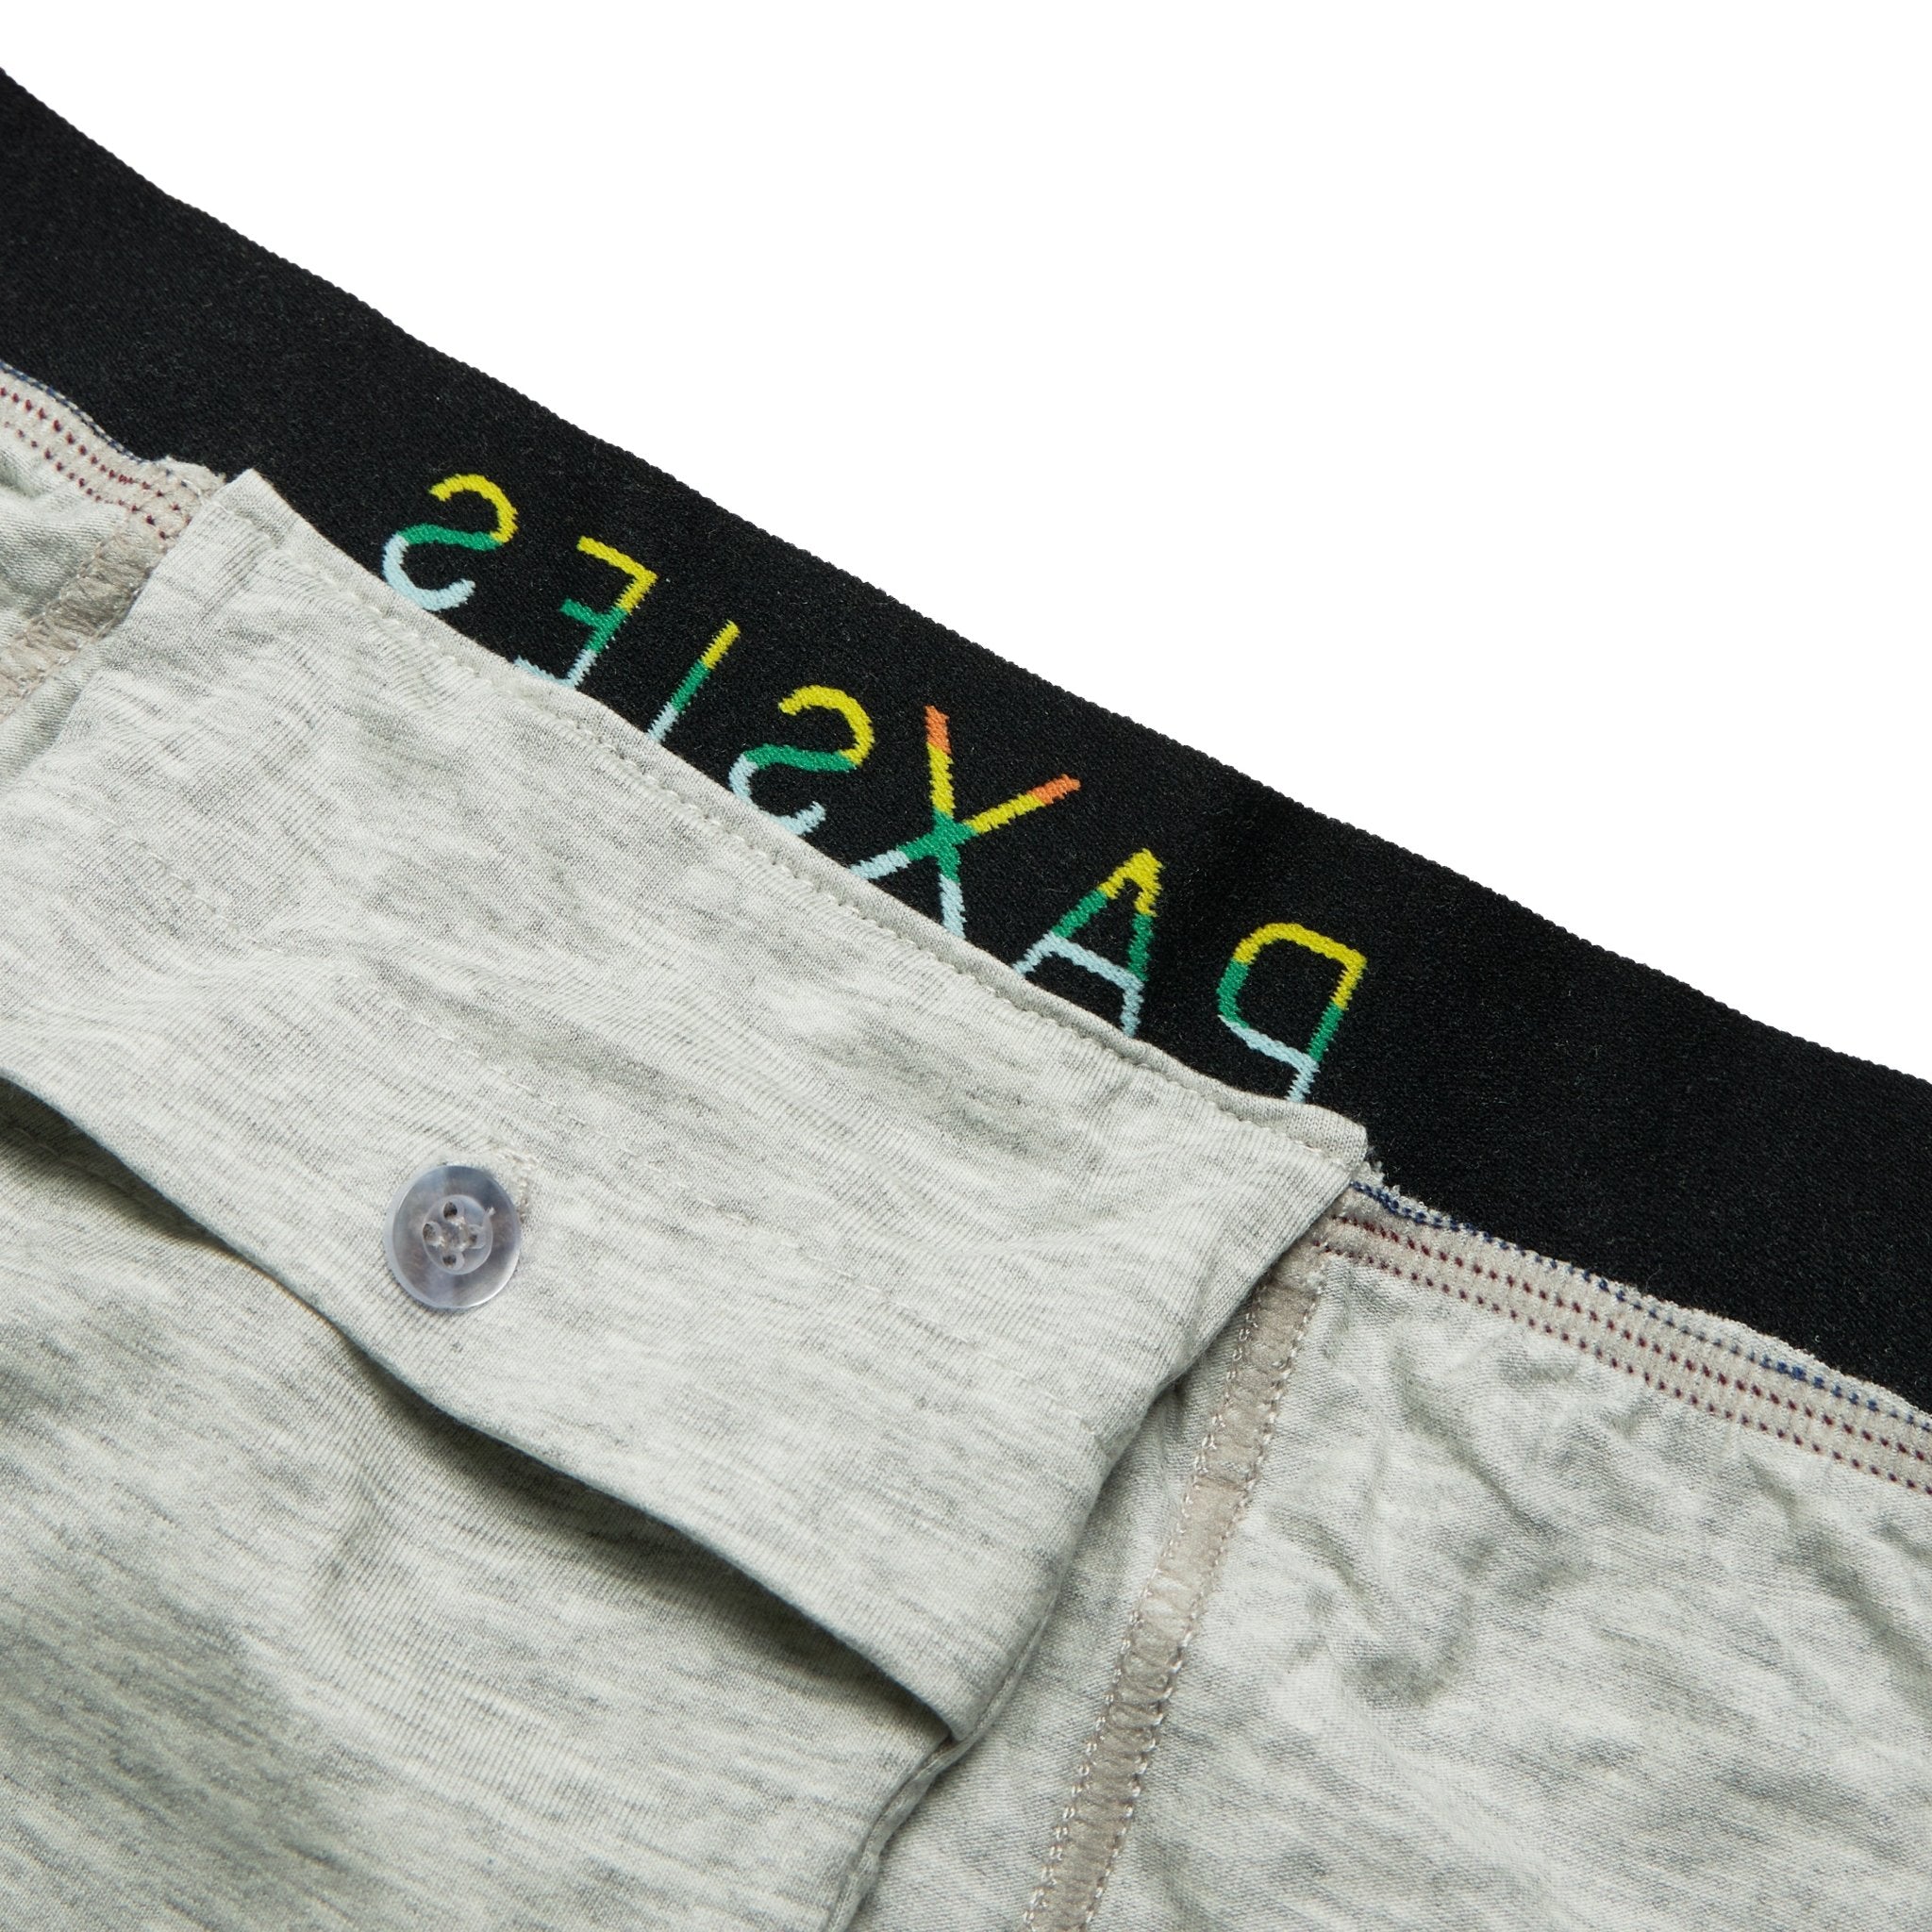 Light Grey All-in-One Packing Boxers